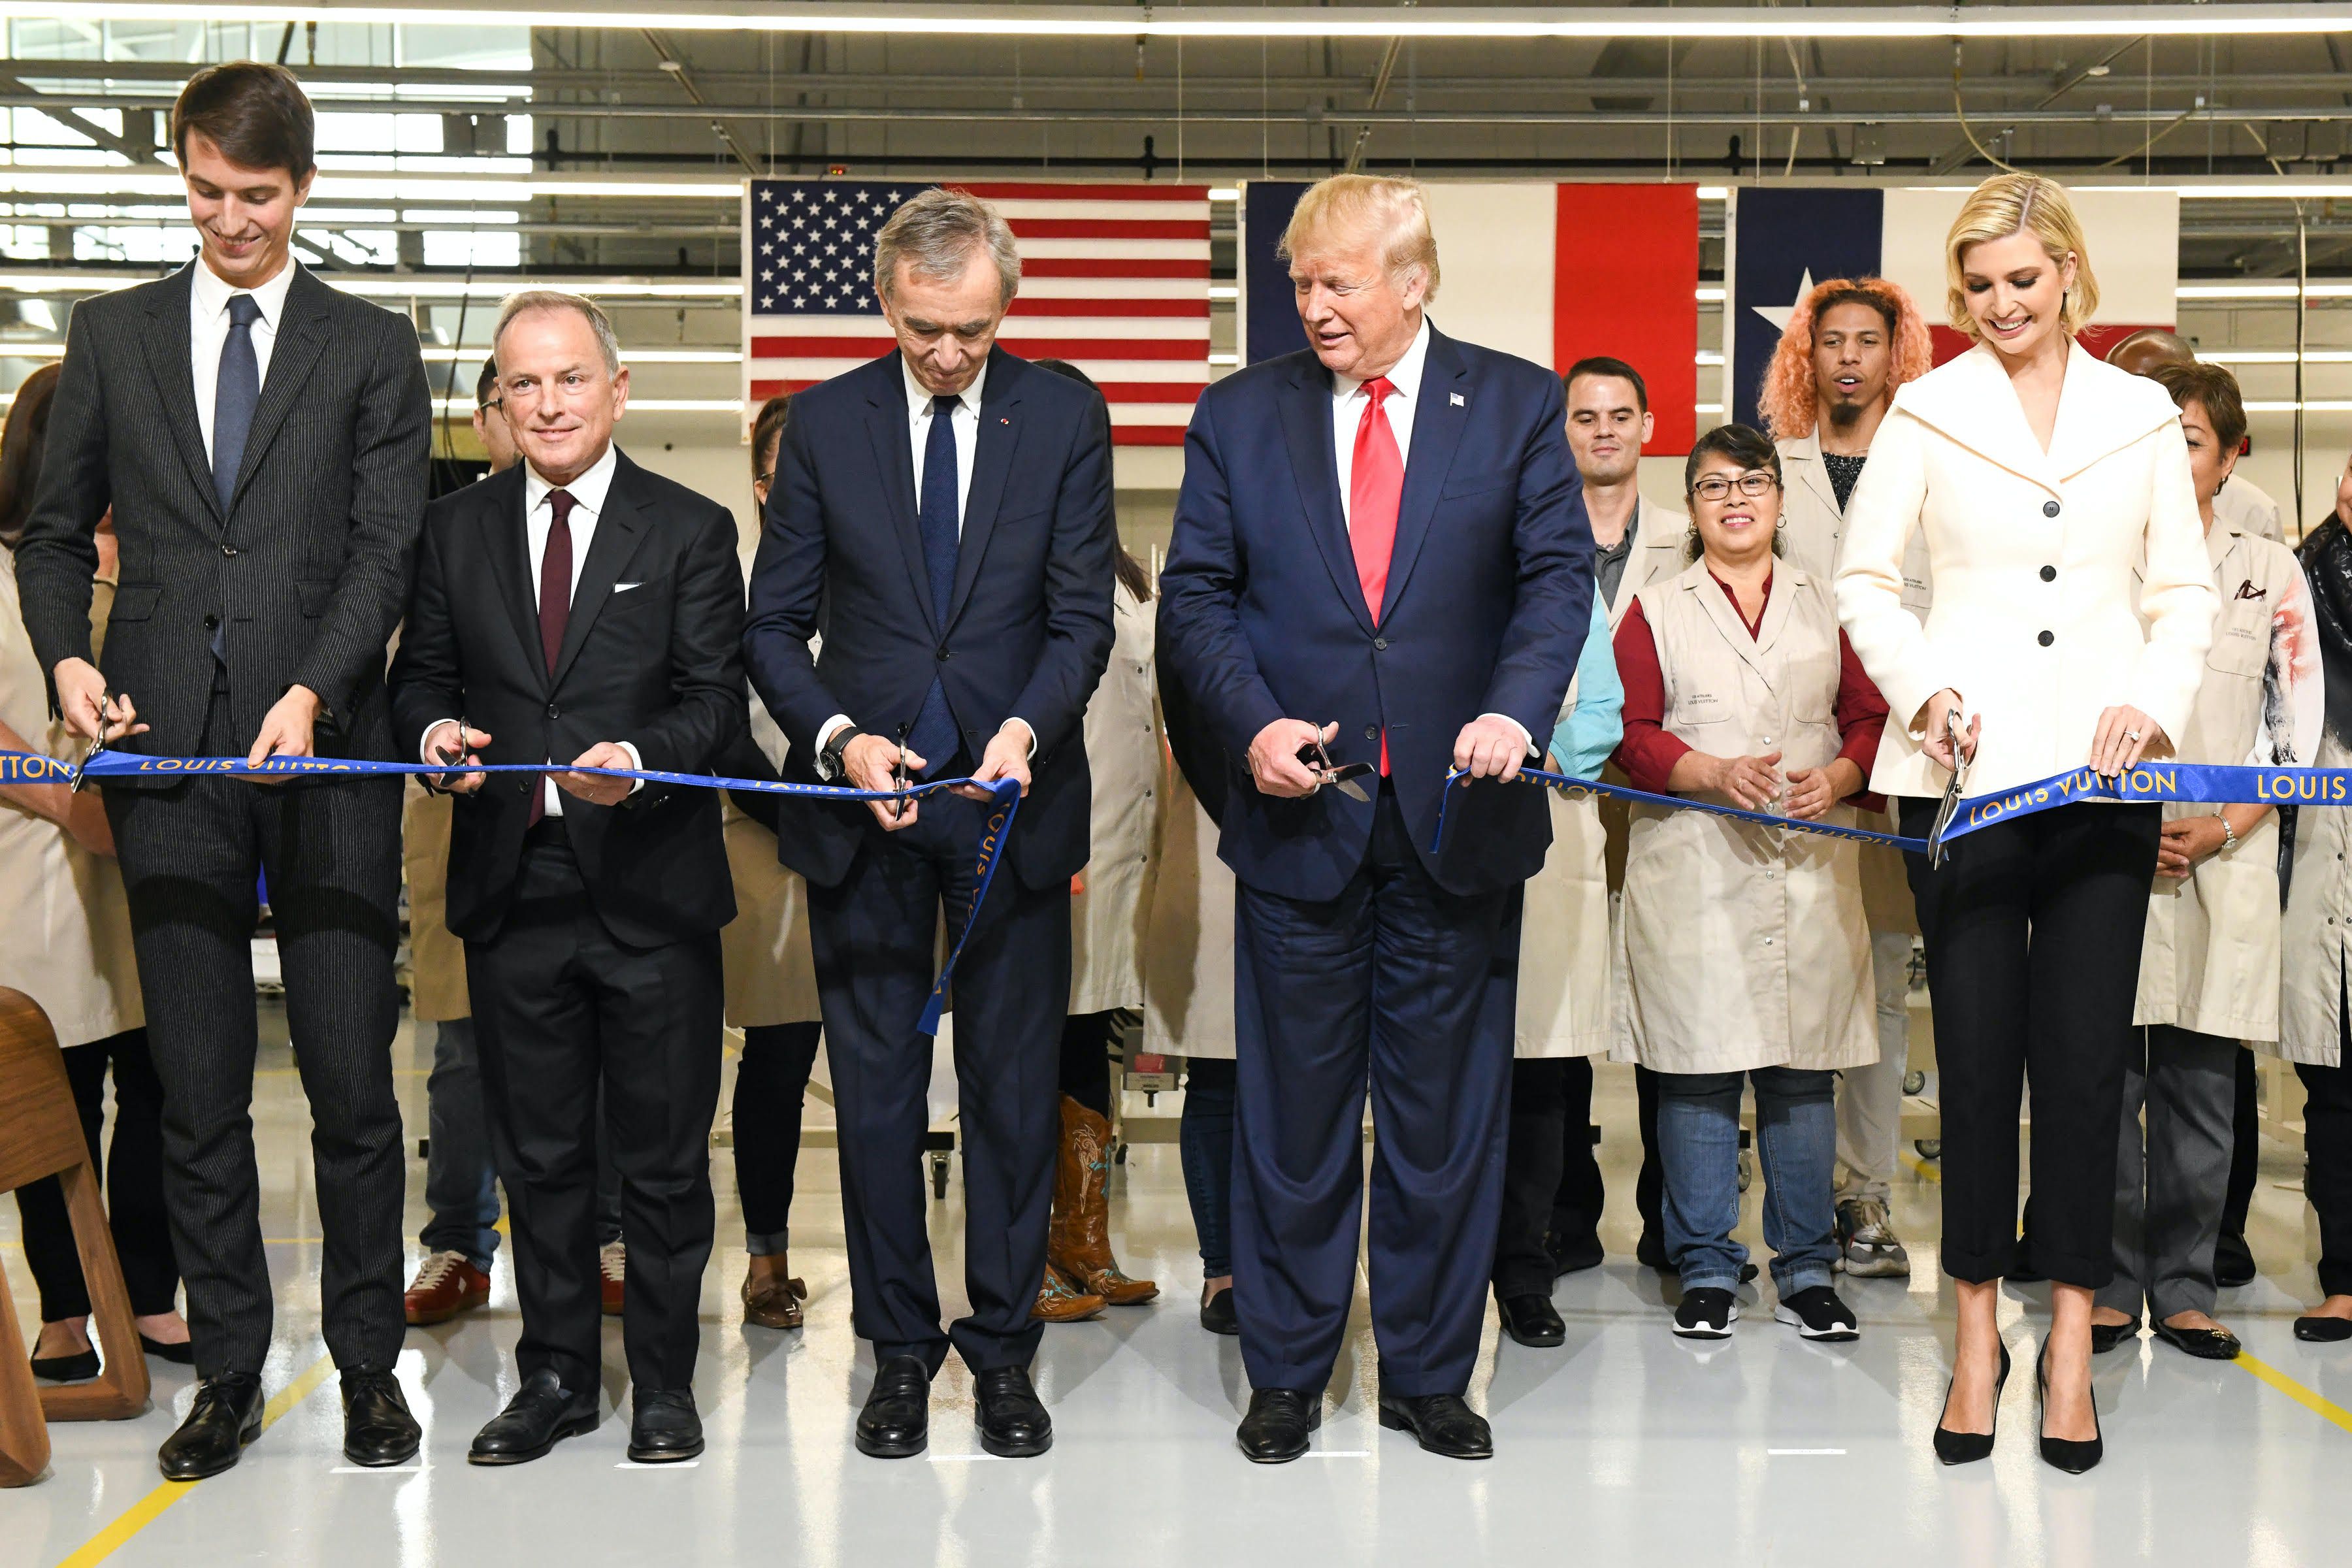 Trump visit brings the world to new Louis Vuitton workshop in